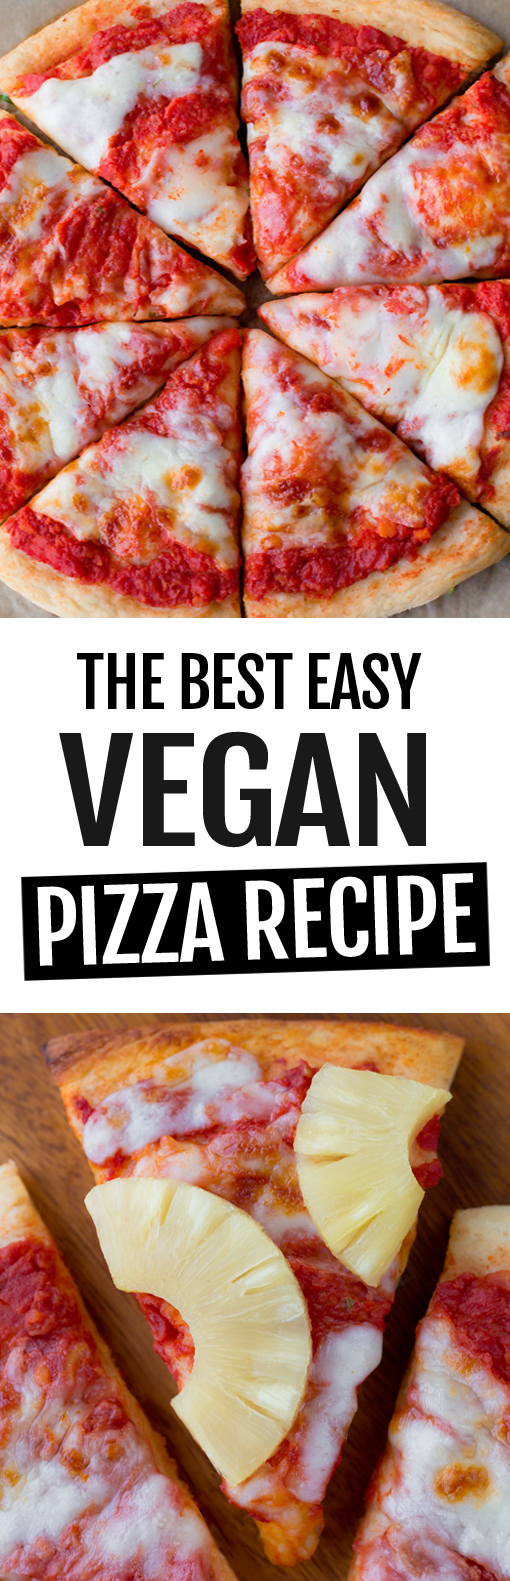 How To Make The Best Vegan Pizza